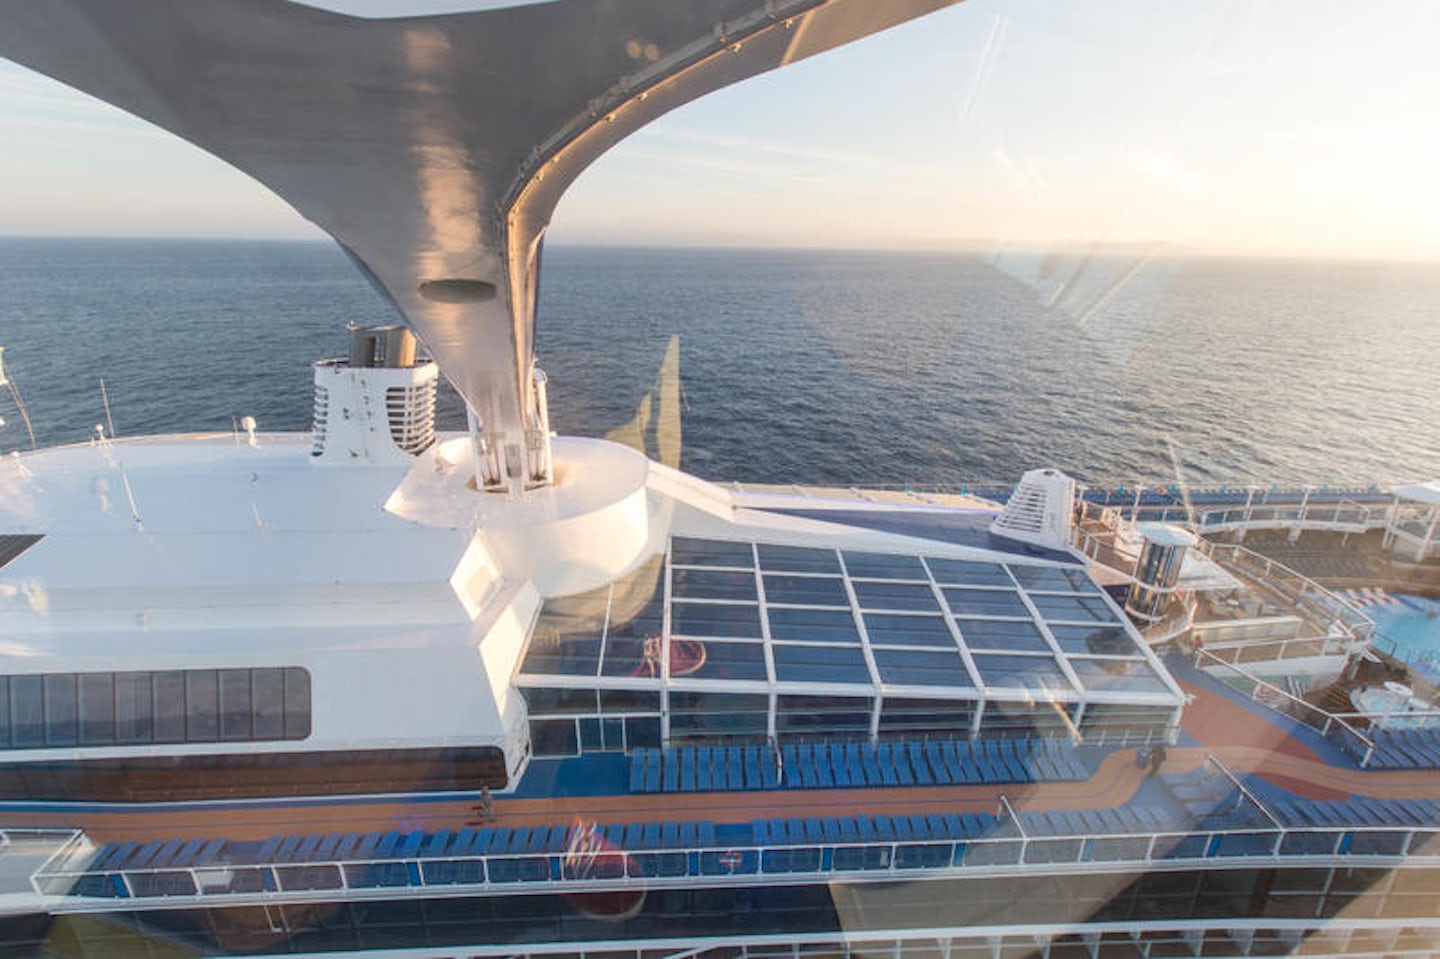 The North Star on Anthem of the Seas